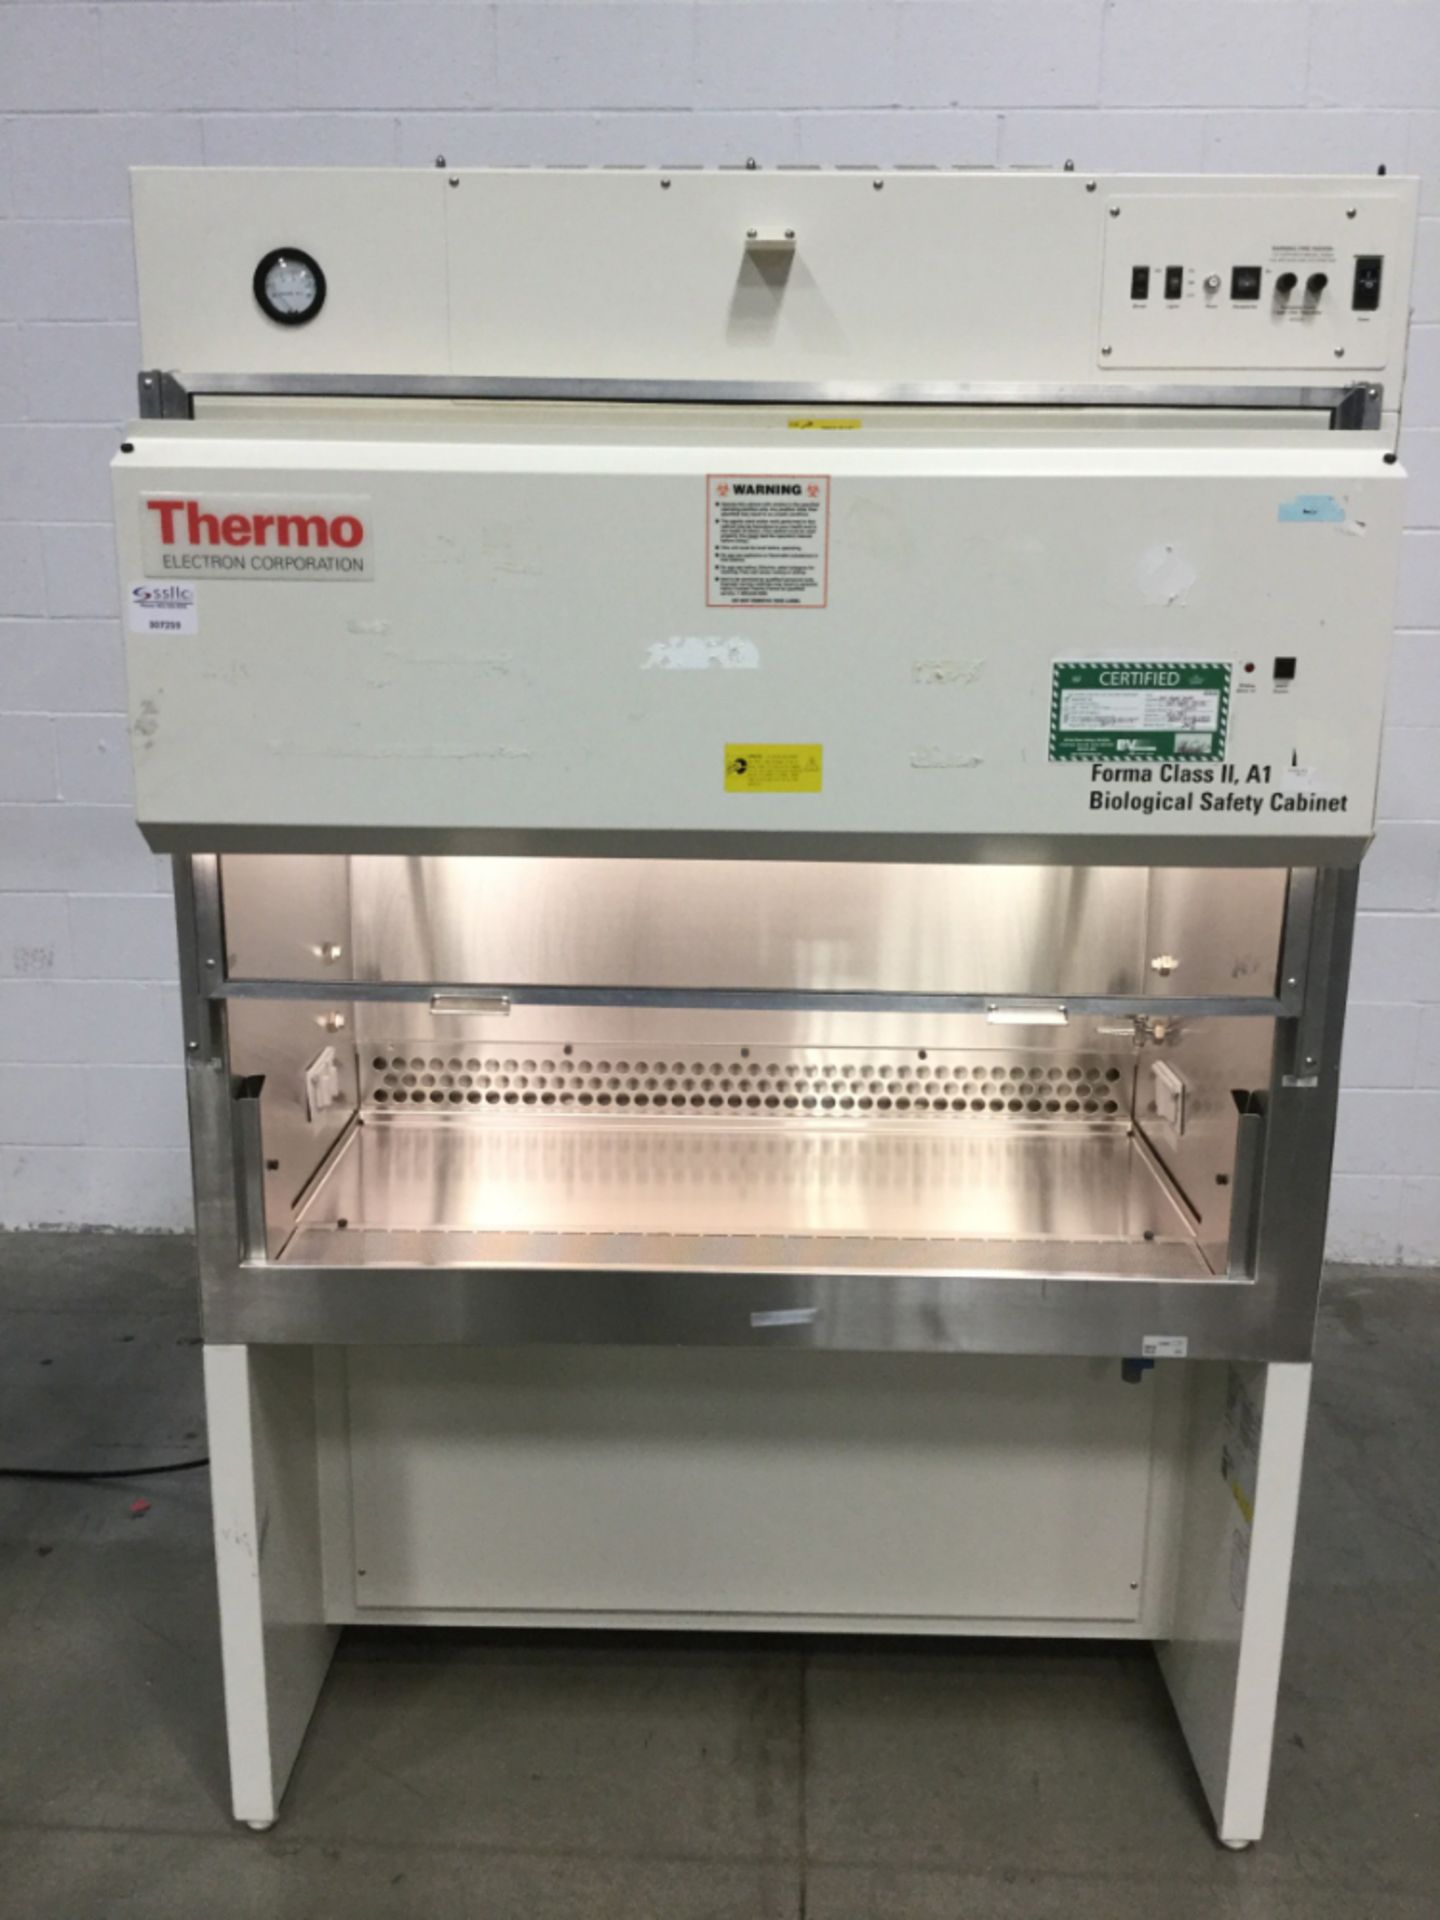 Thermo Electron Forma Class II, A1 Biological Safety Cabinet